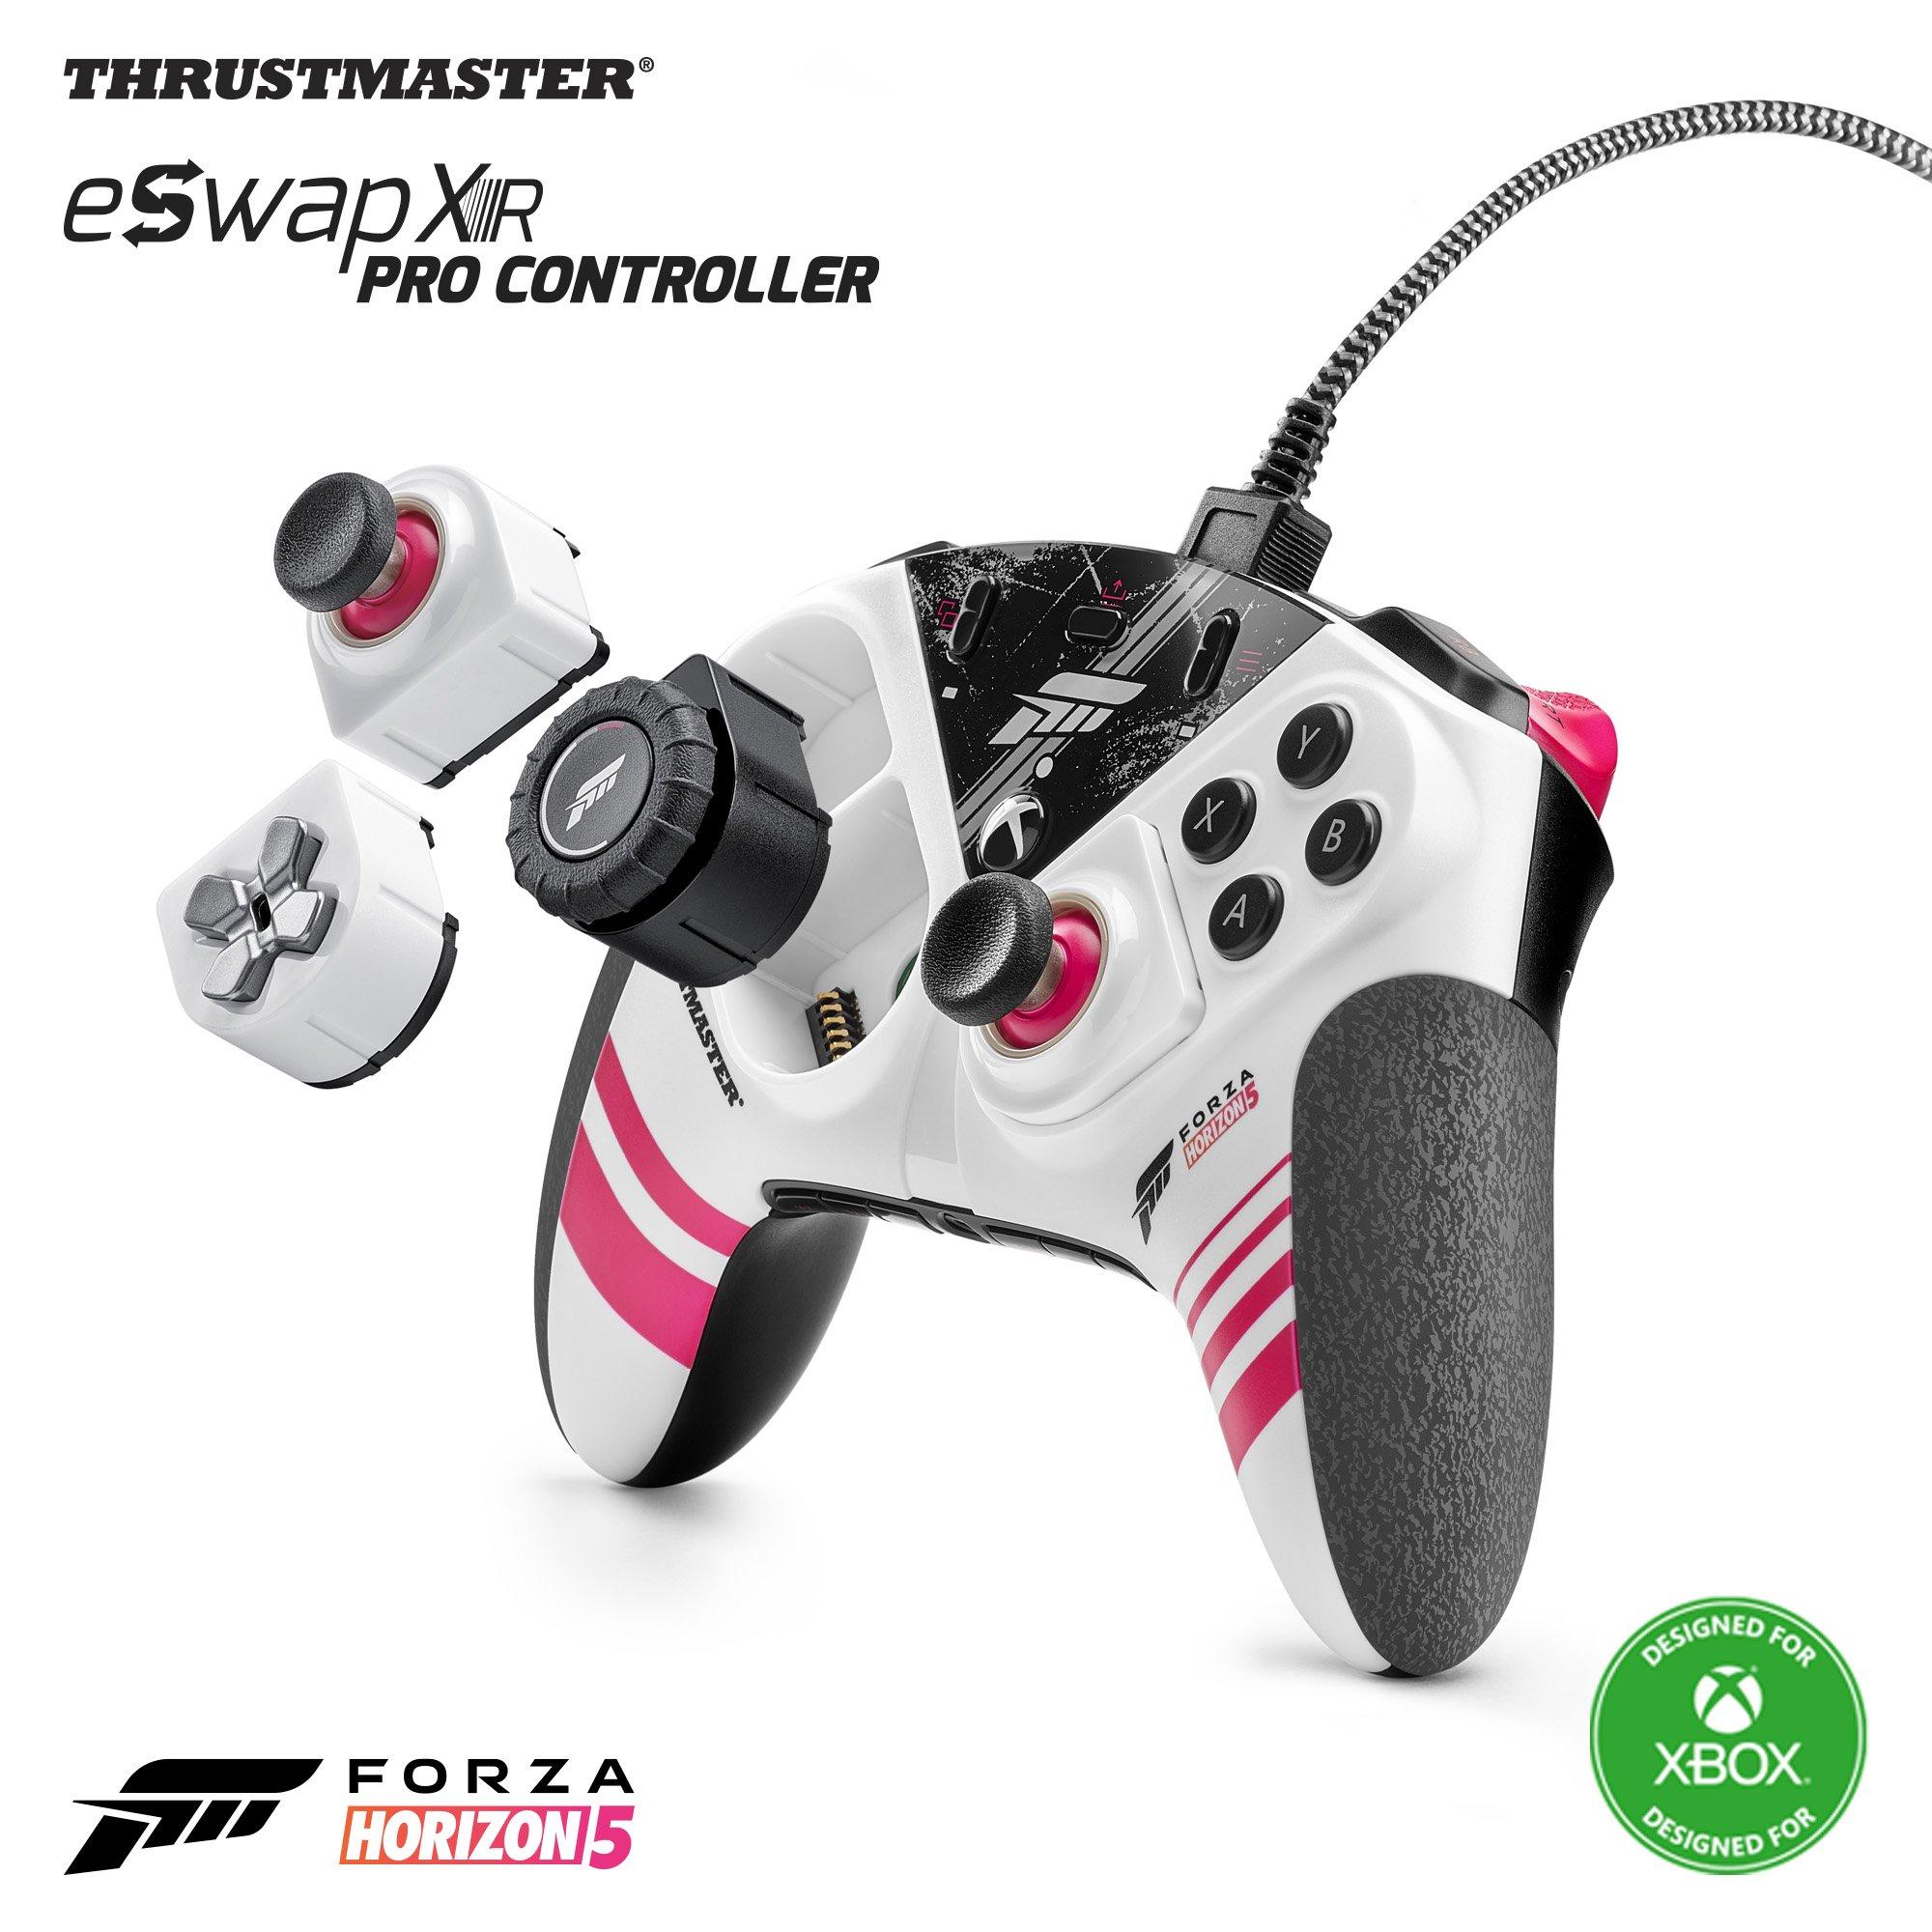 Thrustmaster ESWAP X R Pro Controller Forza Horizon 5 Edition for Xbox Series X/S and PC